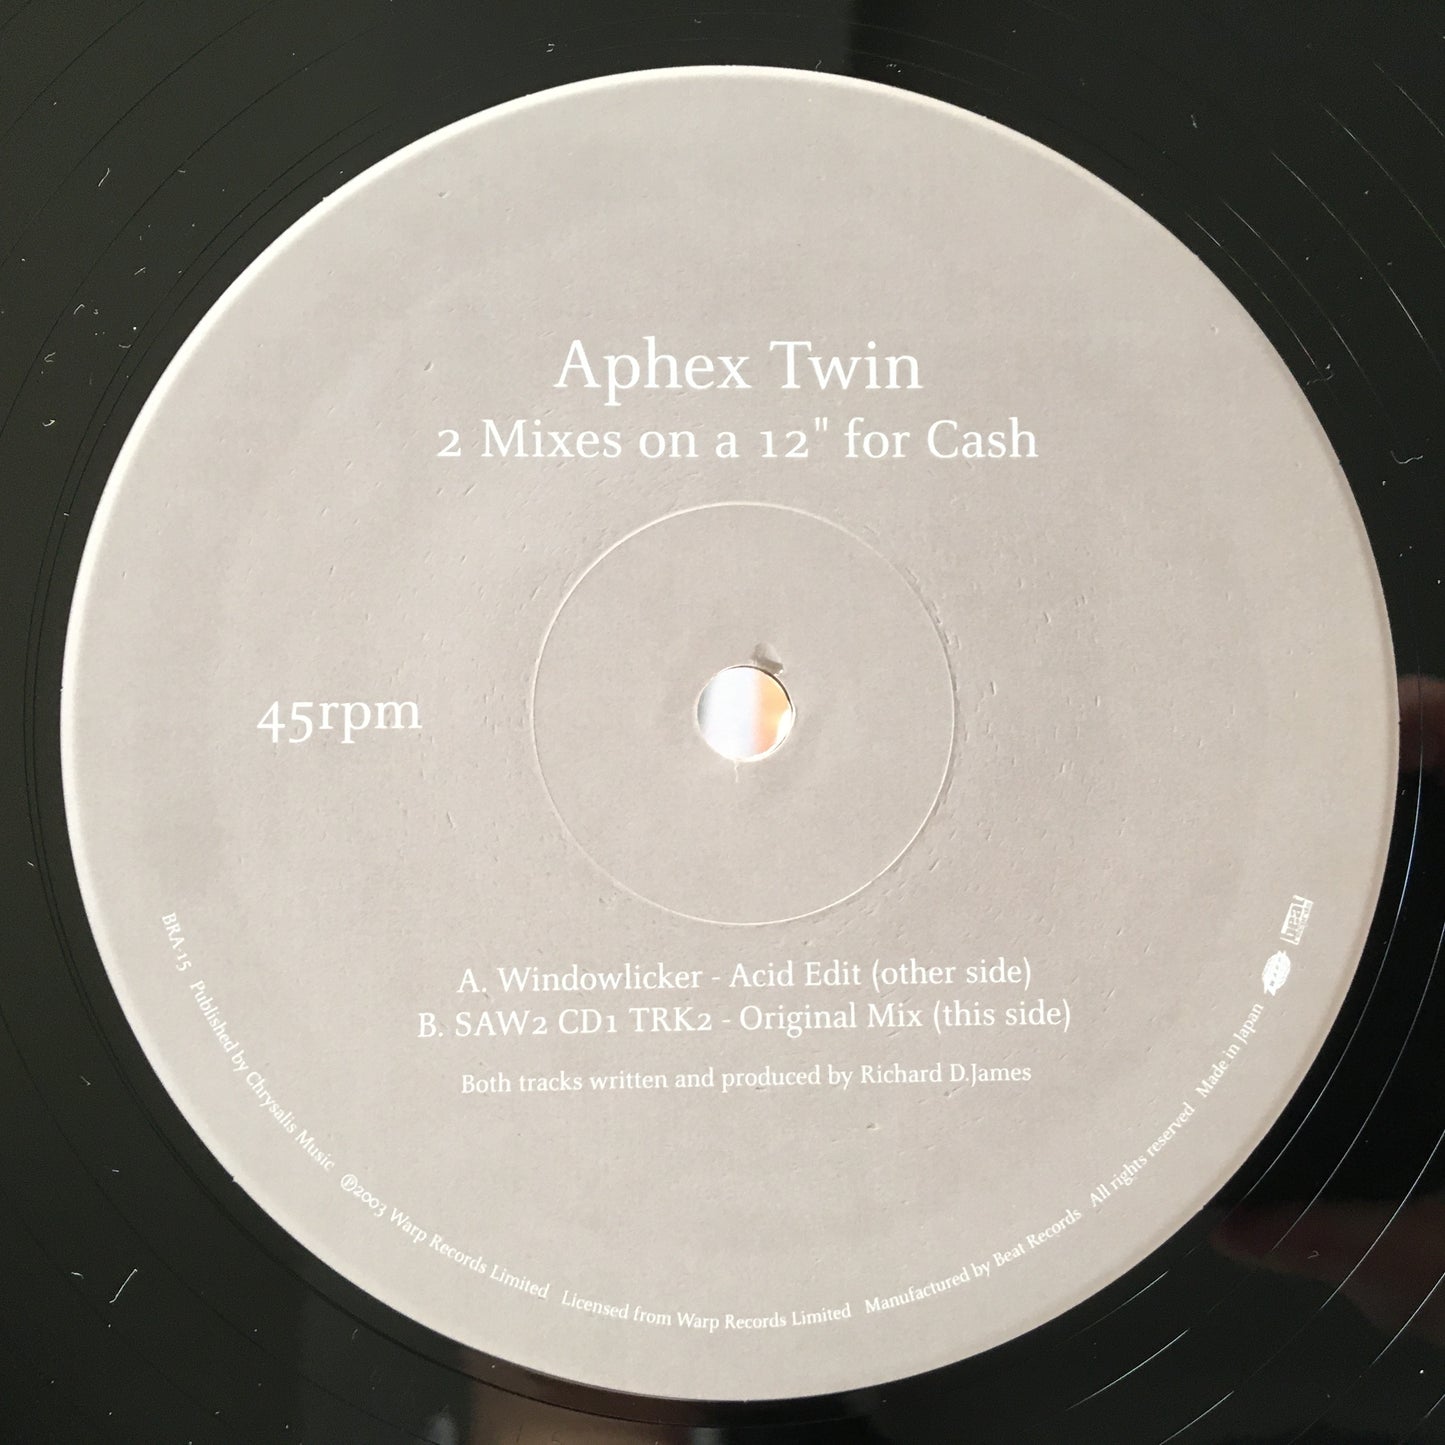 Aphex Twin – 2 Mixes On A 12" For Cash